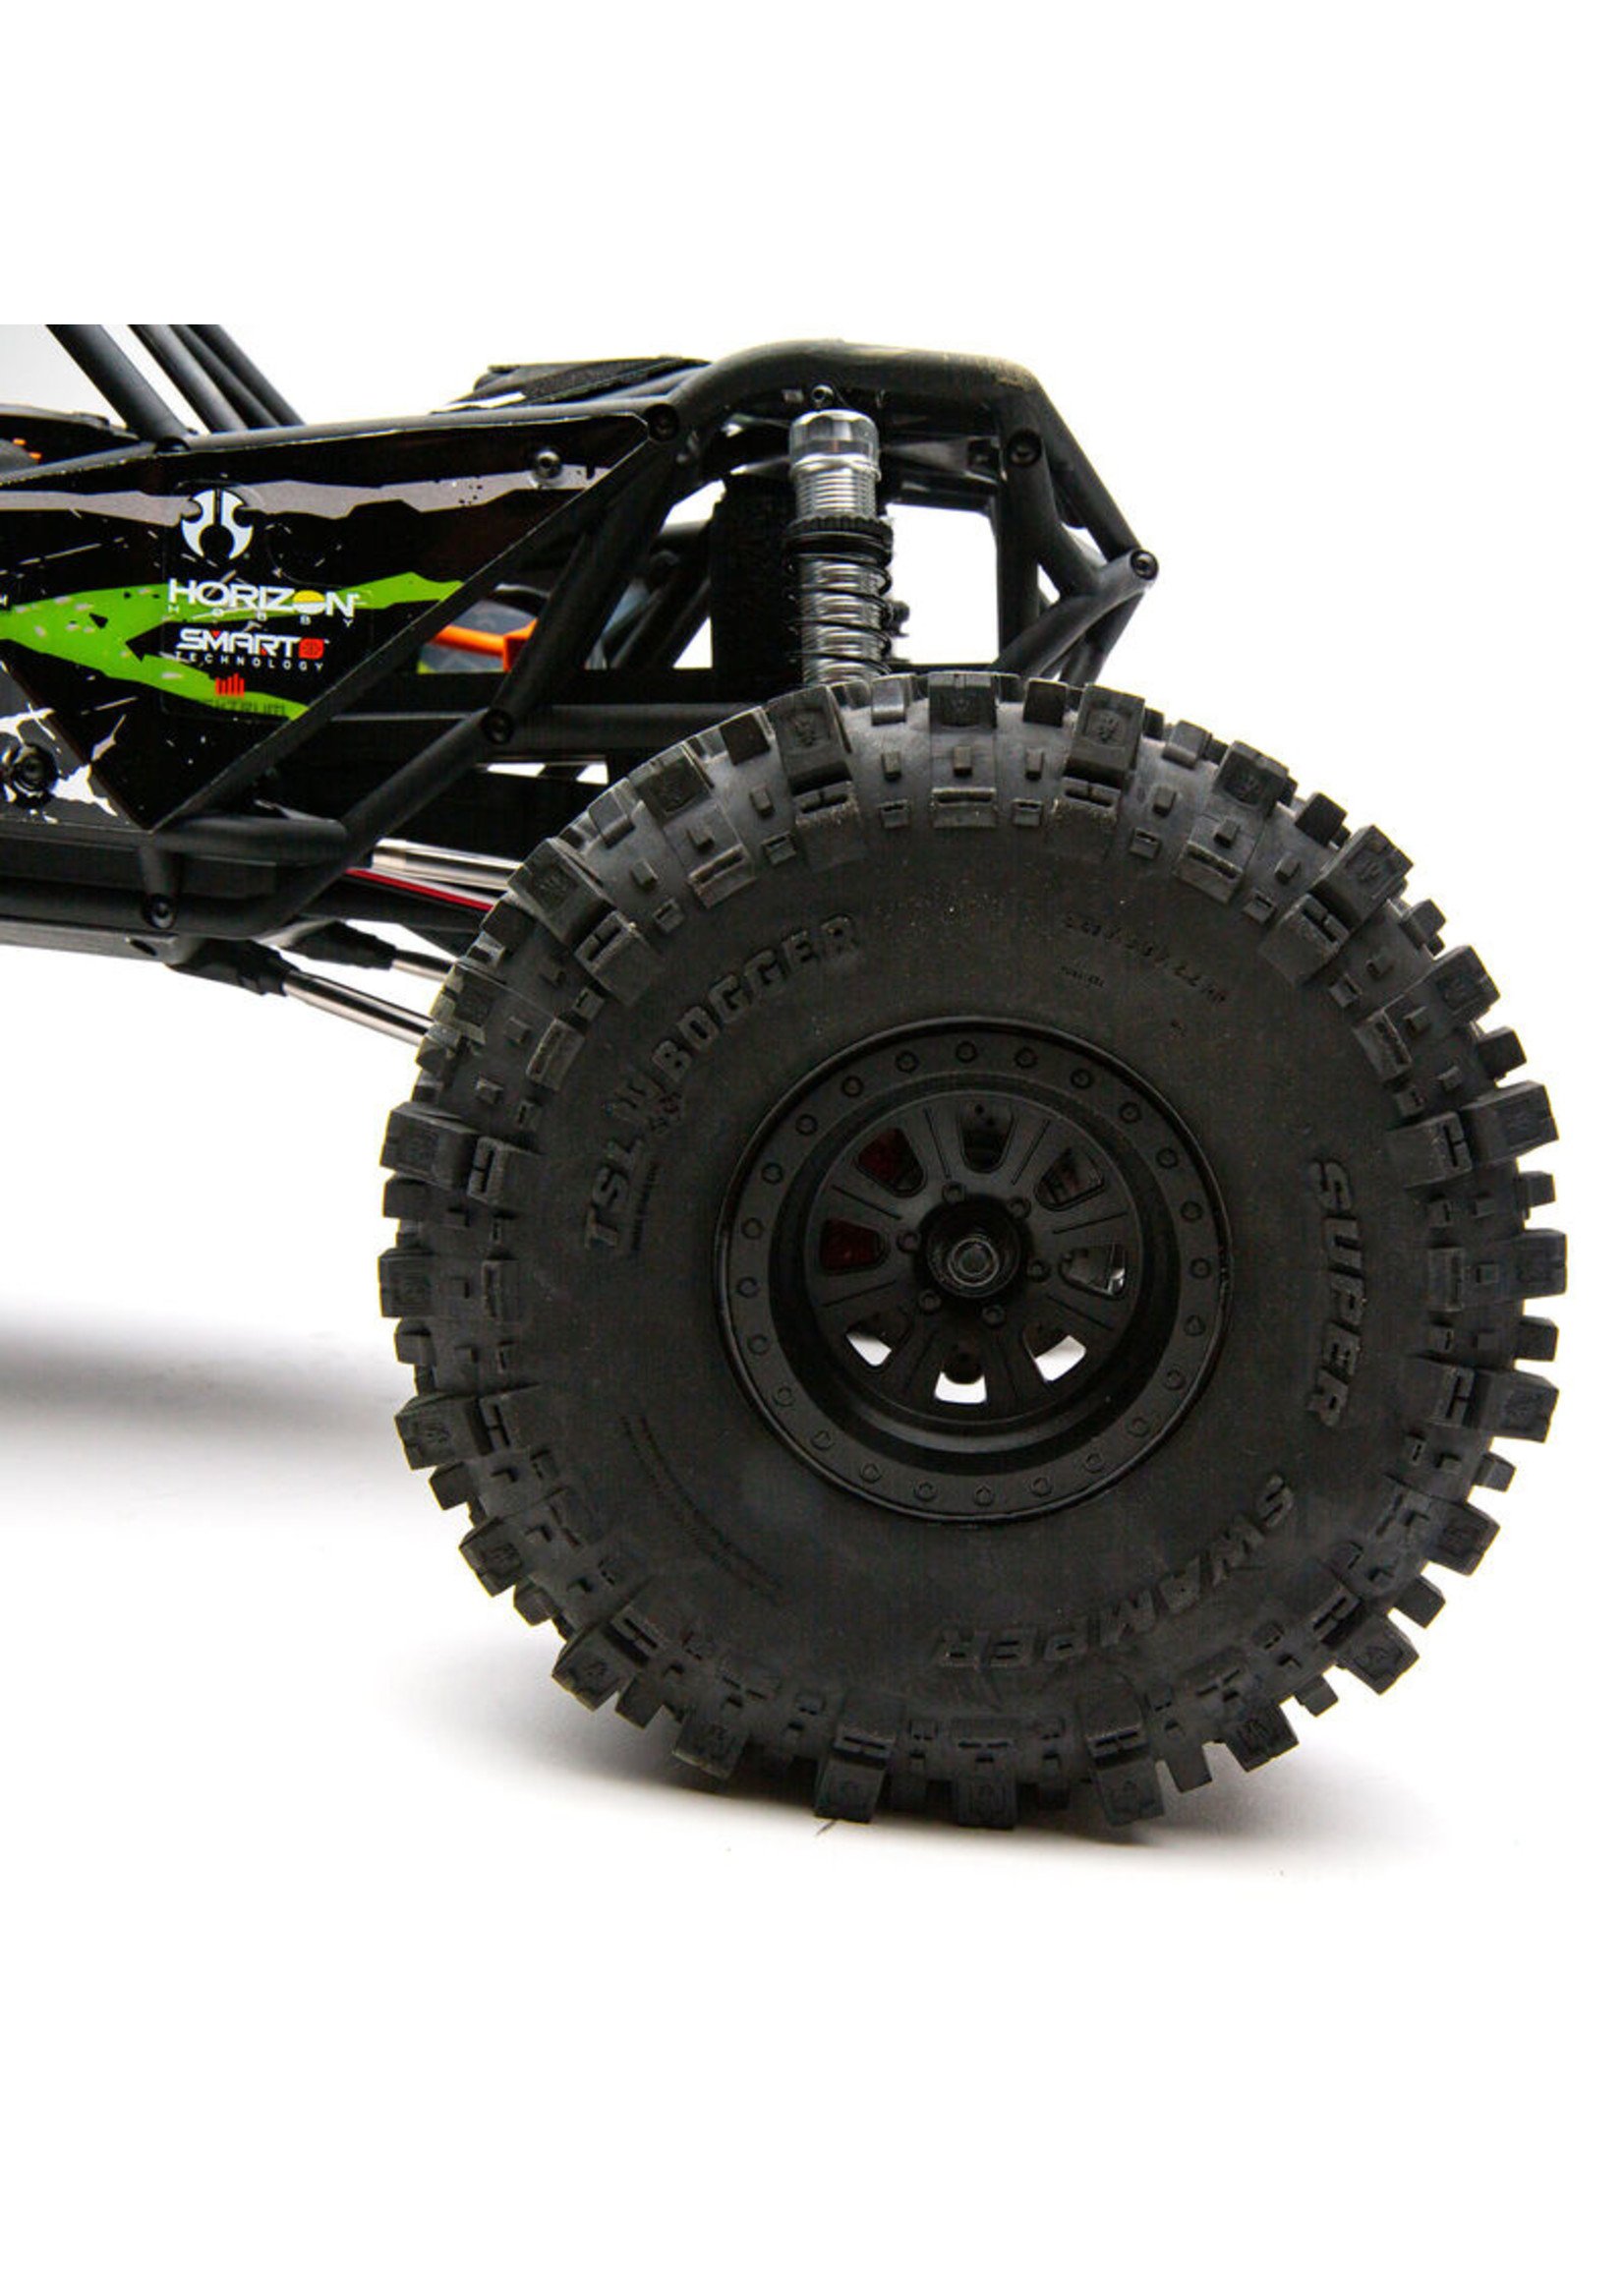 Axial 1/10 RBX10 Ryft 4WD Brushless Rock Bouncer RTR - Black